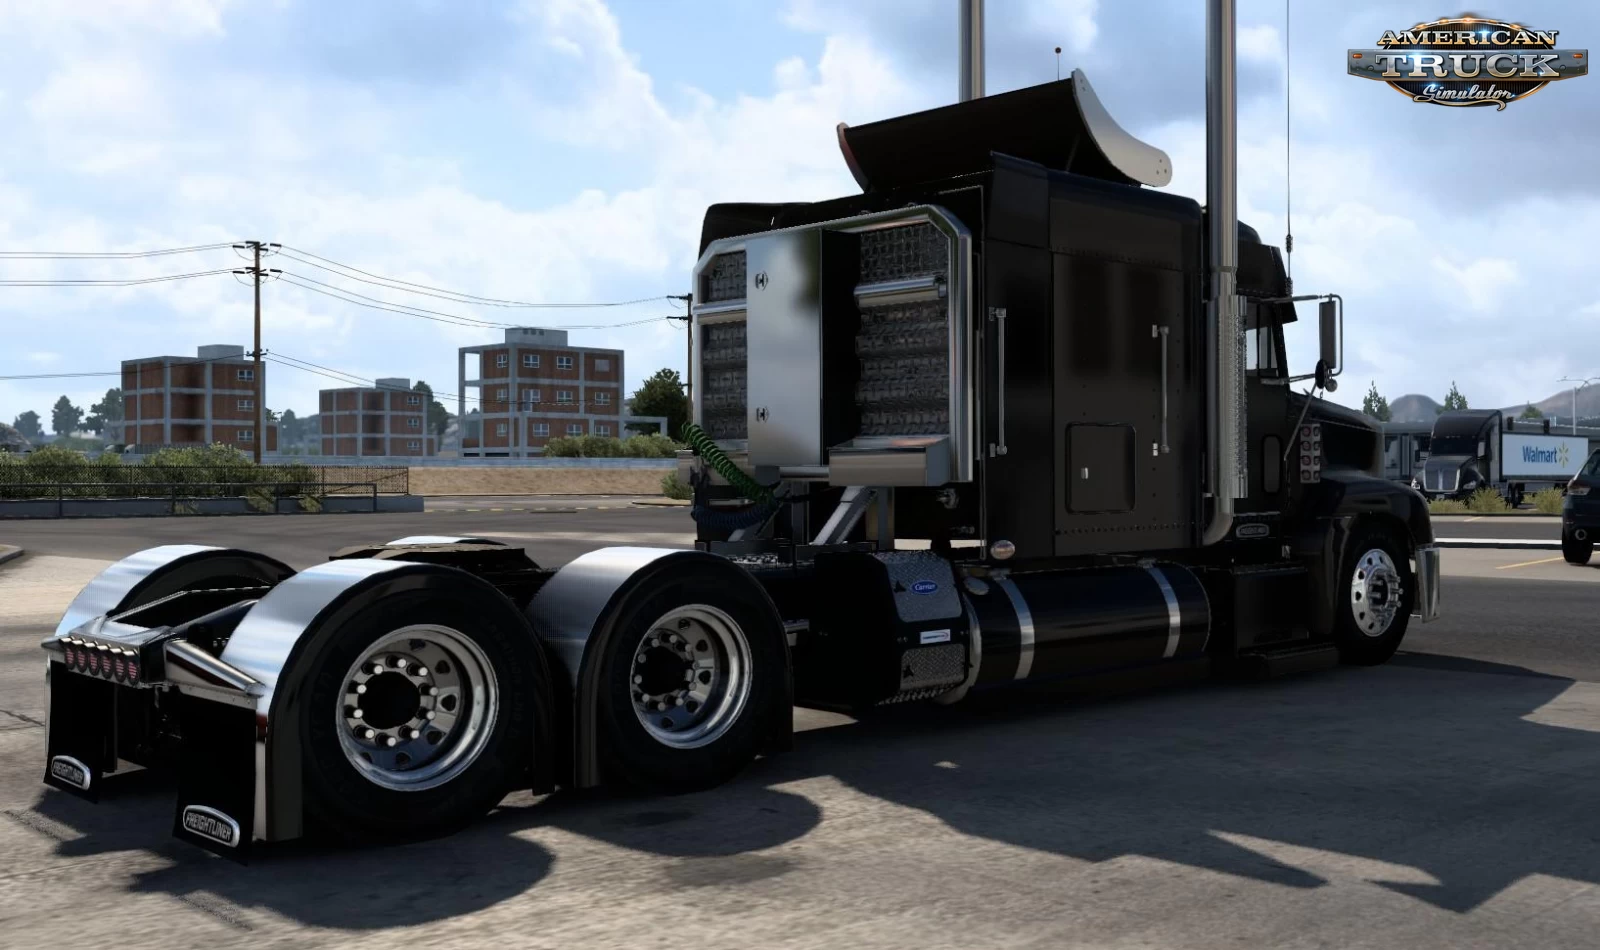 Freightliner FLD Custom v2.0 by ReneNate (1.48.x) for ATS